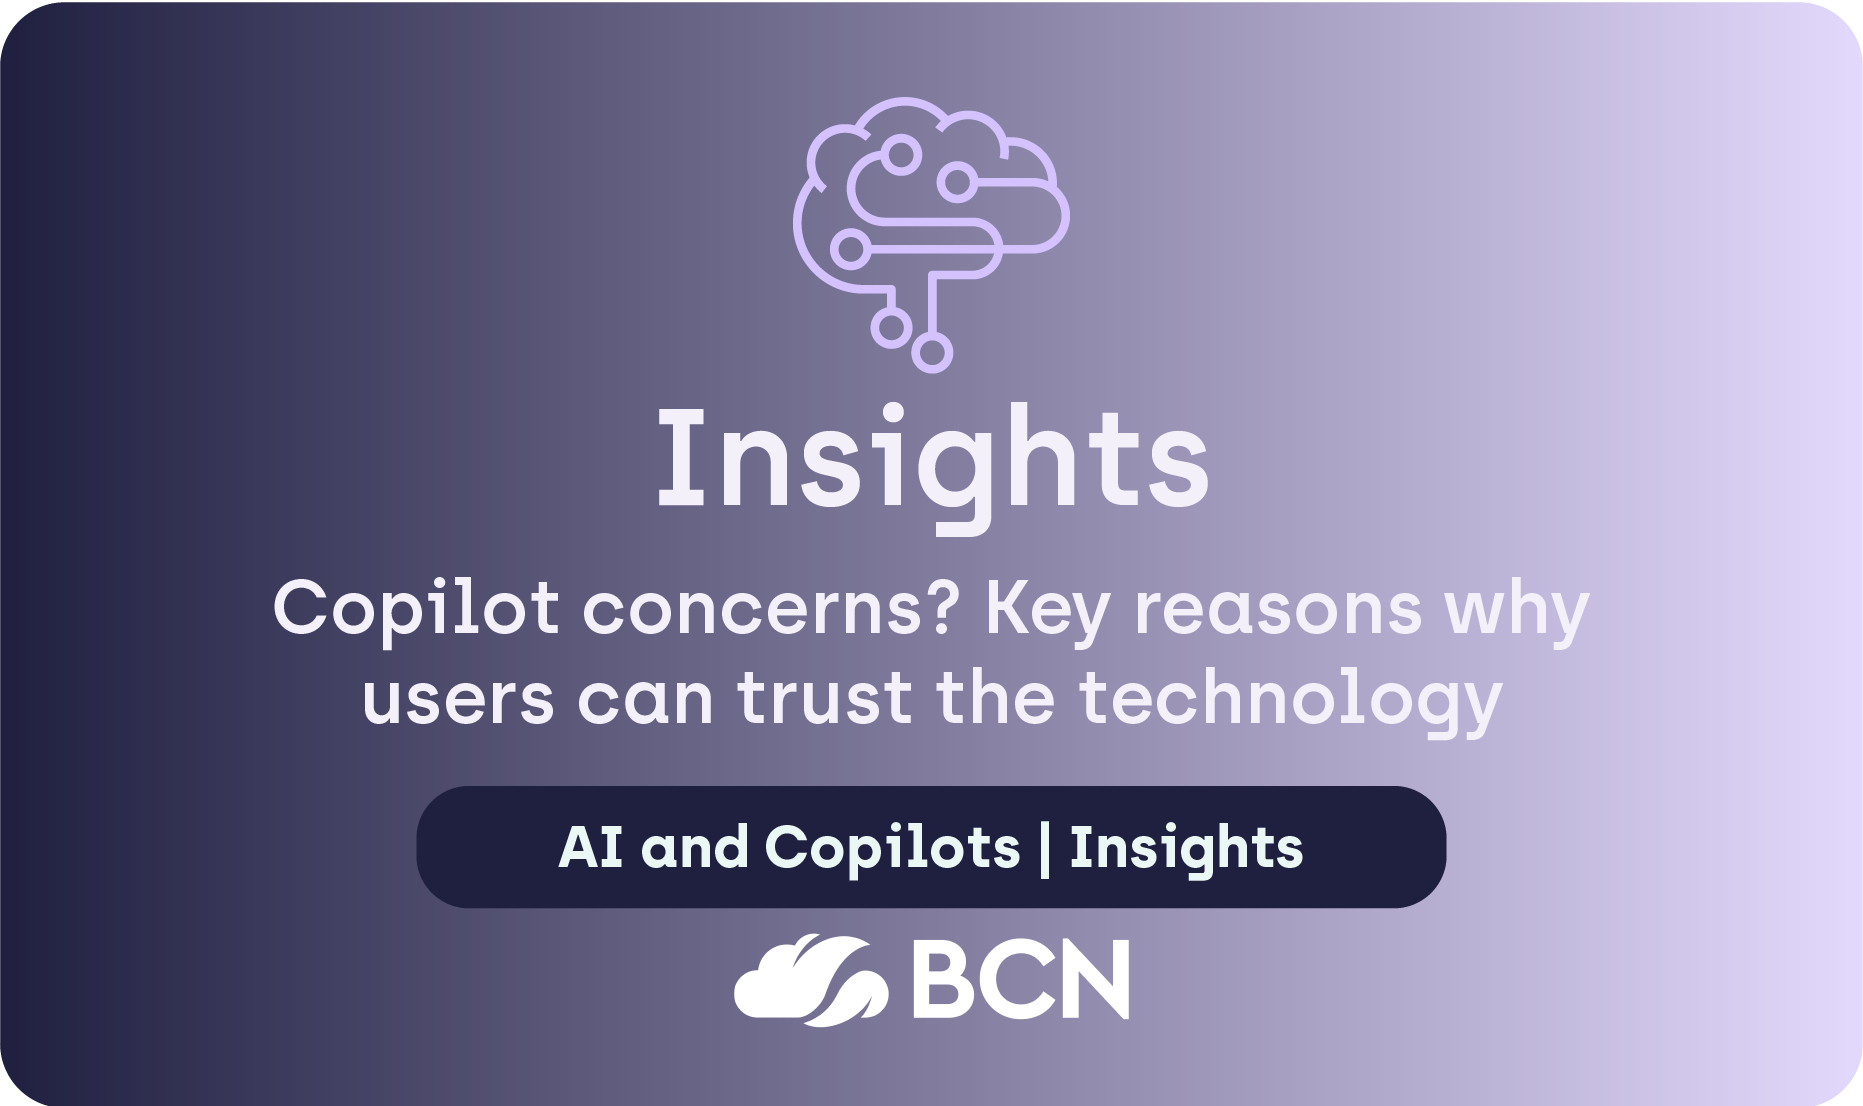 Copilot concerns? Key reasons why users can trust the technology